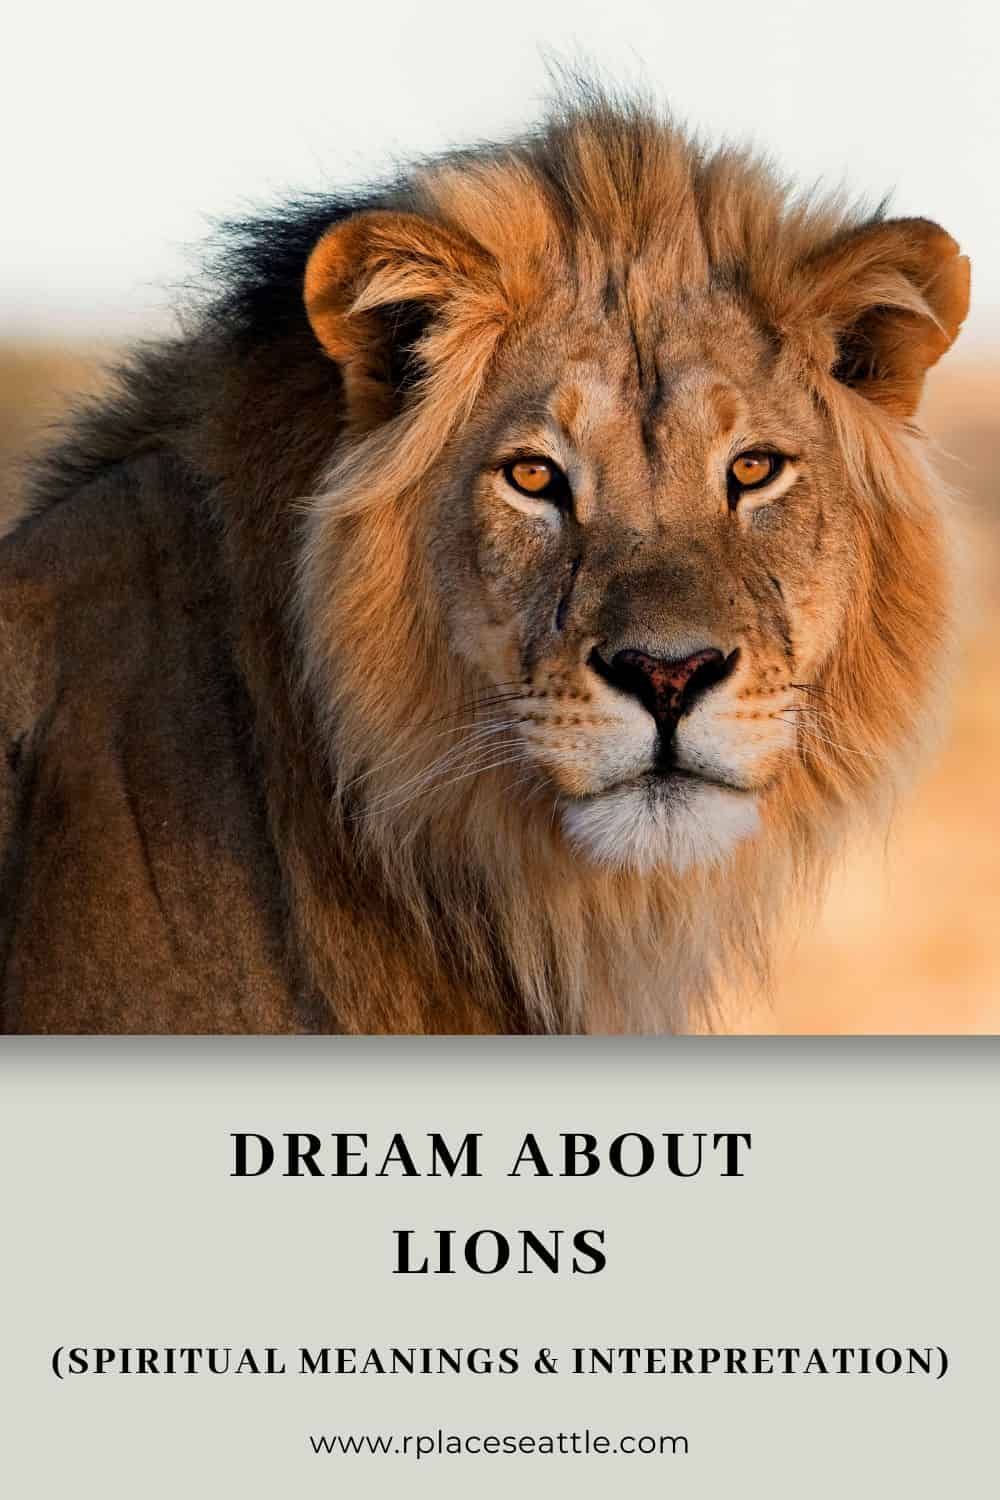 Lion Dream Meanings